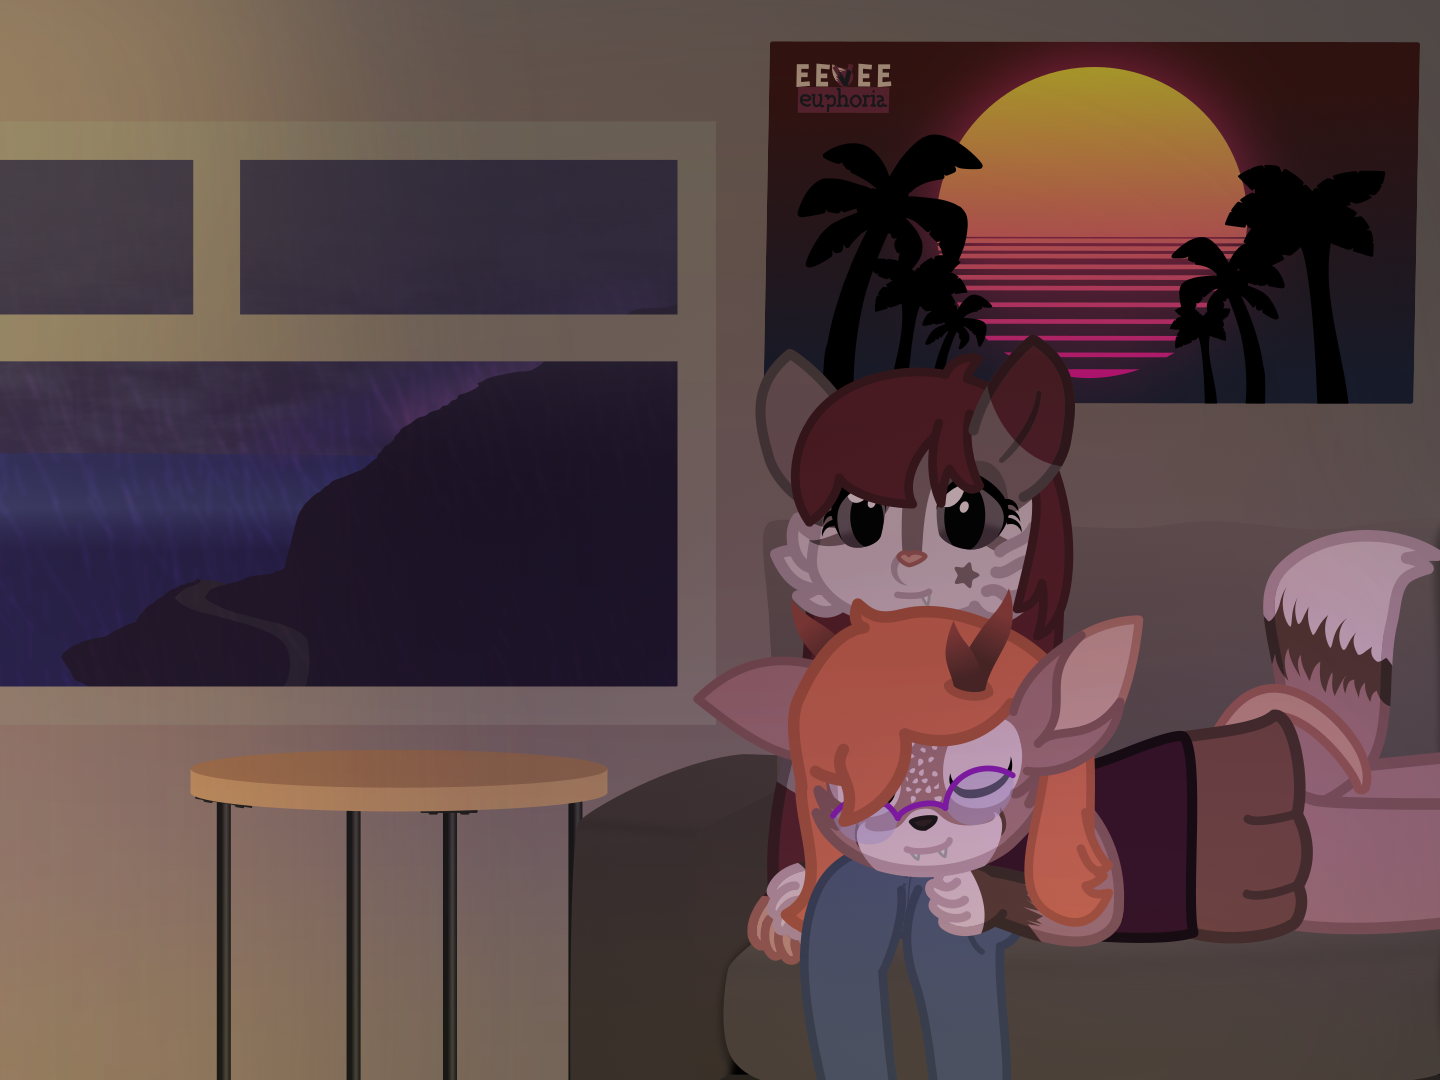 Two girls are on a couch, the opossum is sitting, and the deerfox has her head on the other's lap. There's a vaporwave poster in the background, and a window looking down at a big mountain with a visible path.